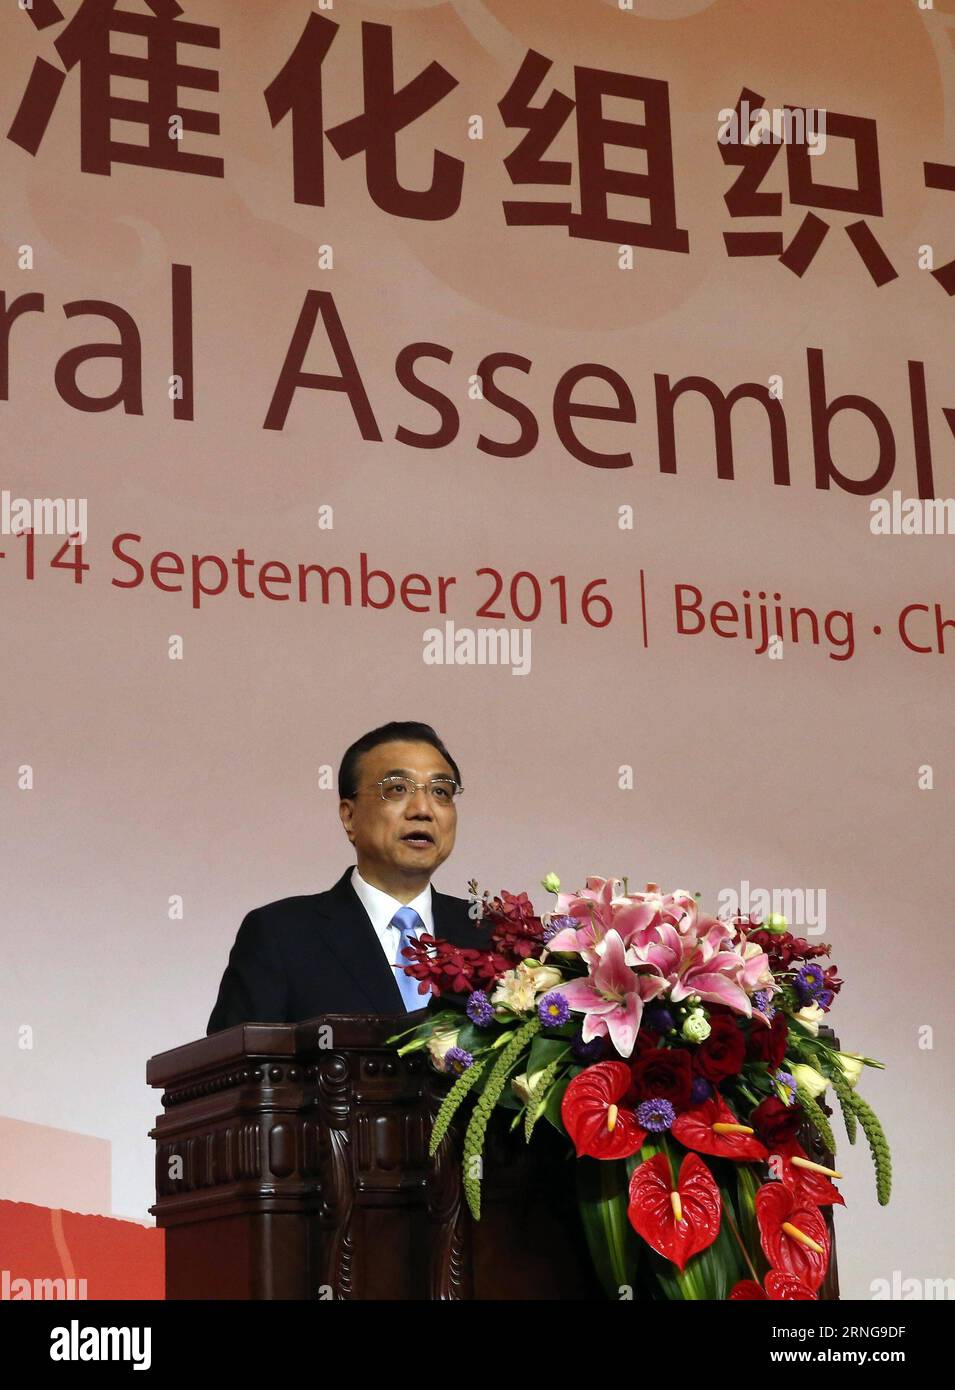 (160914) -- BEIJING, Sept. 14, 2016 -- Chinese Premier Li Keqiang addresses the 39th International Organization for Standardization (ISO) General Assembly in Beijing, capital of China, Sept. 14, 2016. ) (wyo) CHINA-BEIJING-LI KEQIANG-ISO GENERAL ASSEMBLY (CN) LiuxWeibing PUBLICATIONxNOTxINxCHN   160914 Beijing Sept 14 2016 Chinese Premier left Keqiang addresses The 39th International Organization for Standardization ISO General Assembly in Beijing Capital of China Sept 14 2016 wyo China Beijing left Keqiang ISO General Assembly CN LiuxWeibing PUBLICATIONxNOTxINxCHN Stock Photo